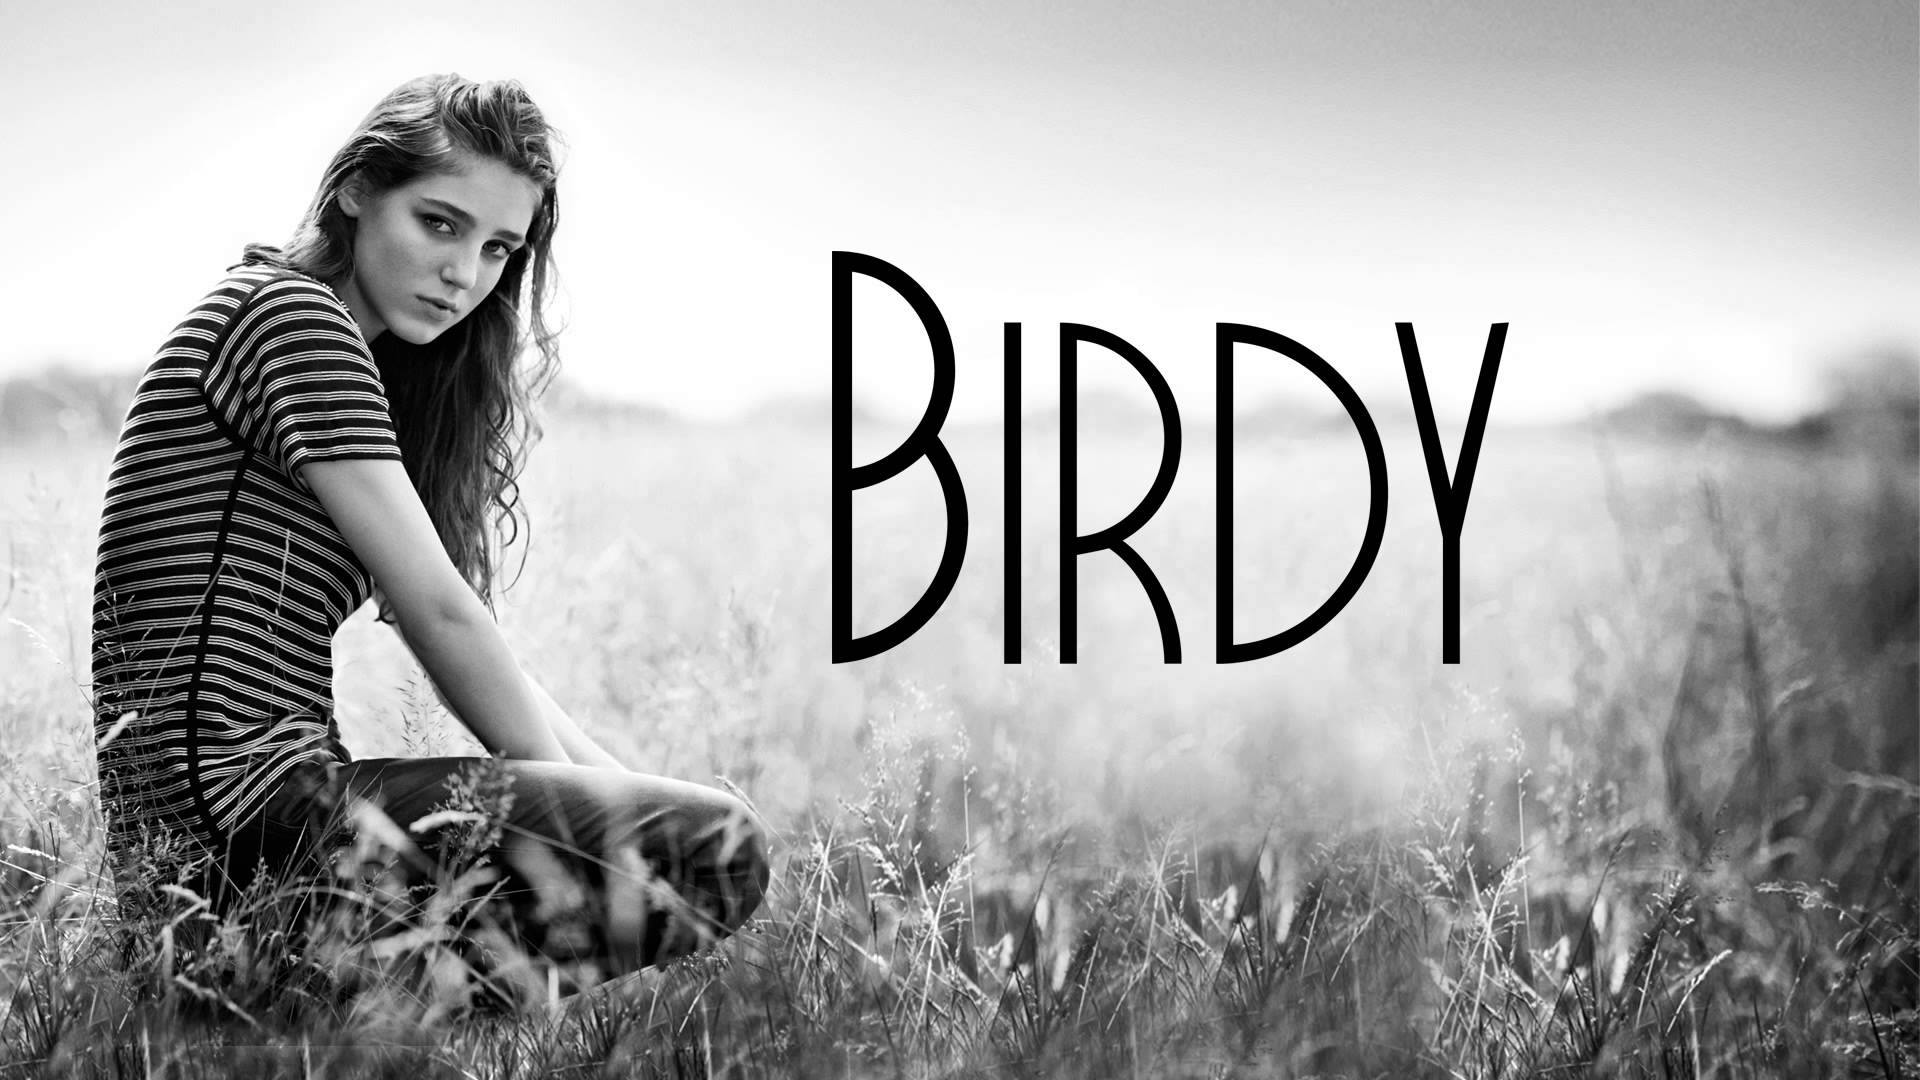 Artist On the Rise BIRDY